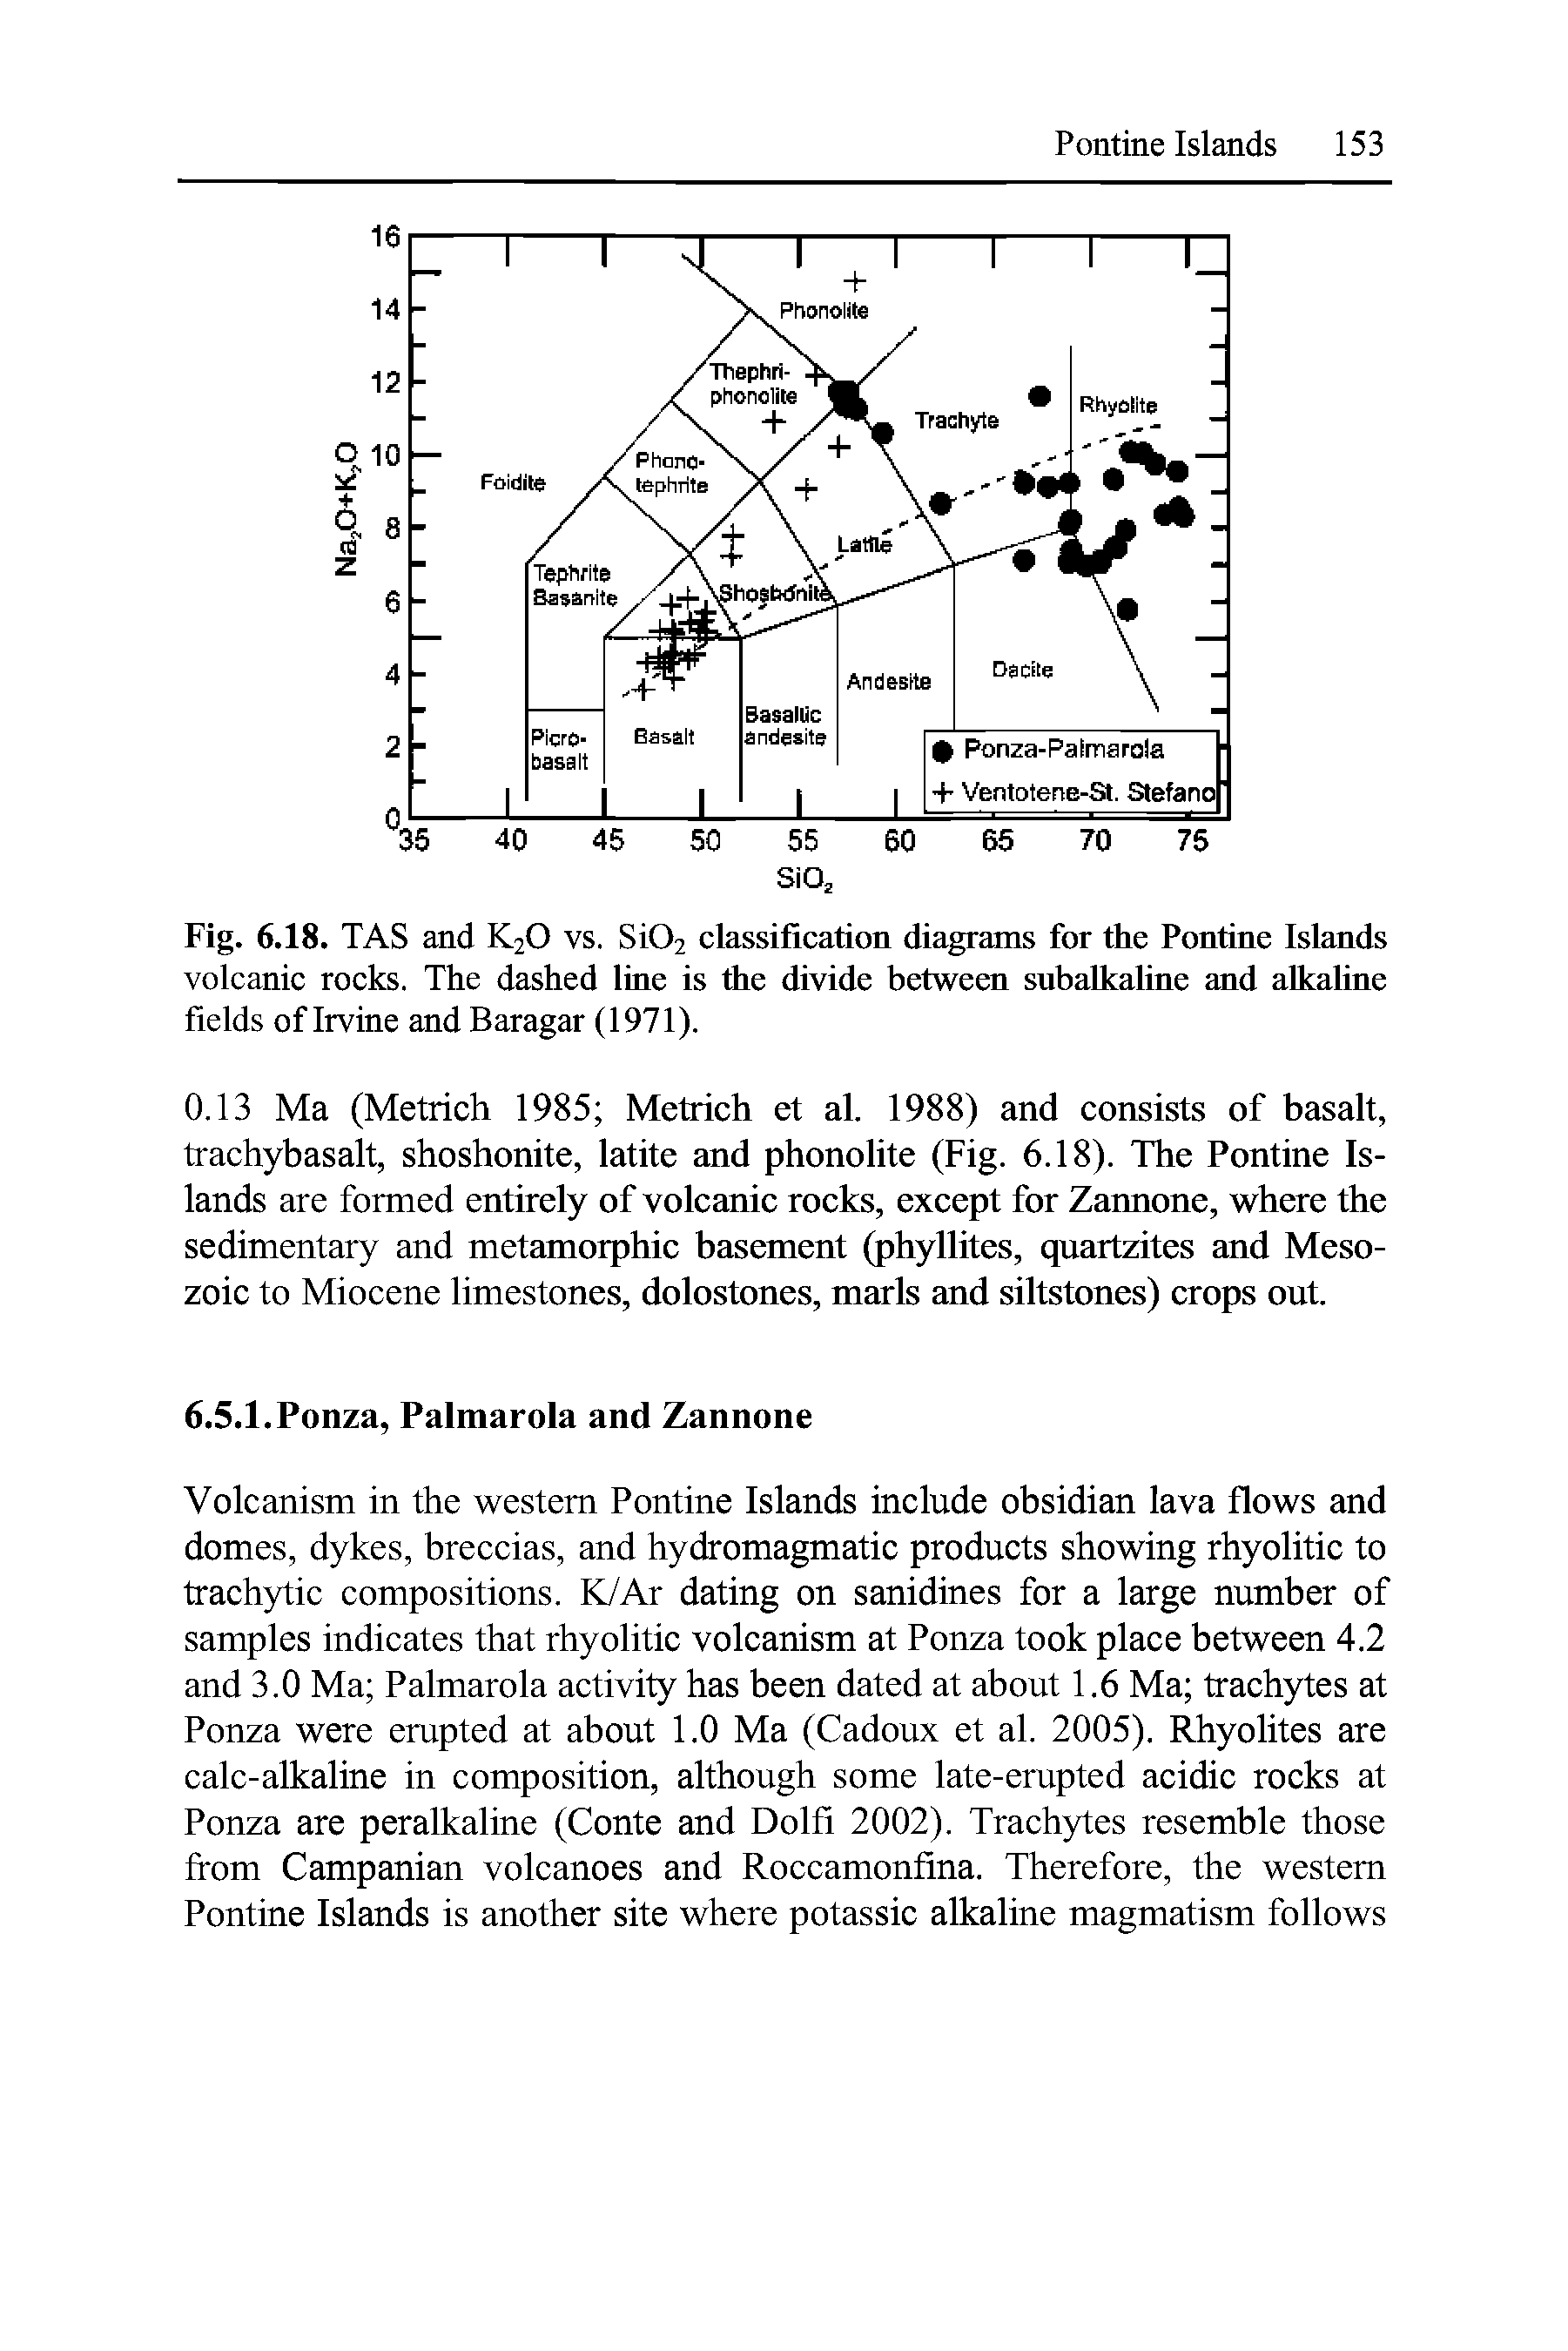 Fig. 6.18. TAS and K20 vs. Si02 classification diagrams for the Pontine Islands volcanic rocks. The dashed line is the divide between subalkaline and alkaline fields of Irvine and Baragar (1971).